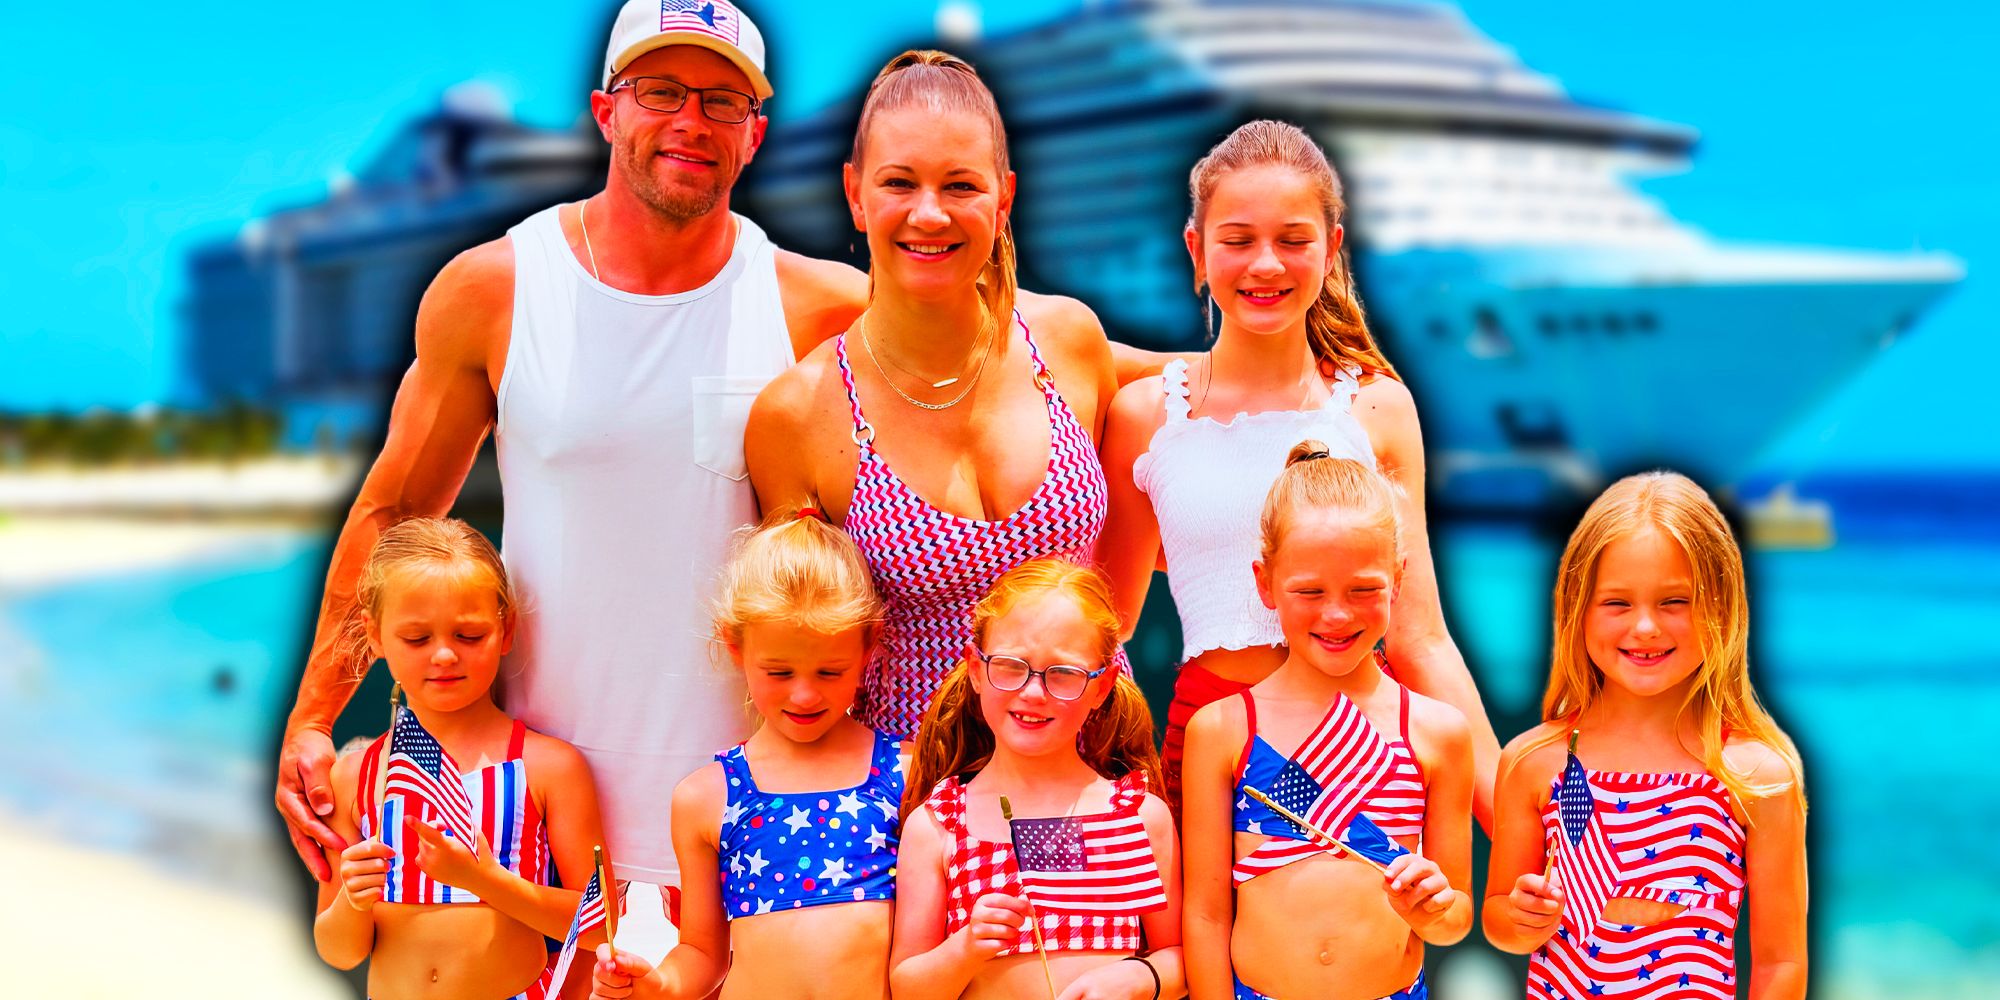 Outdaughtered – The Ashley's Reality Roundup